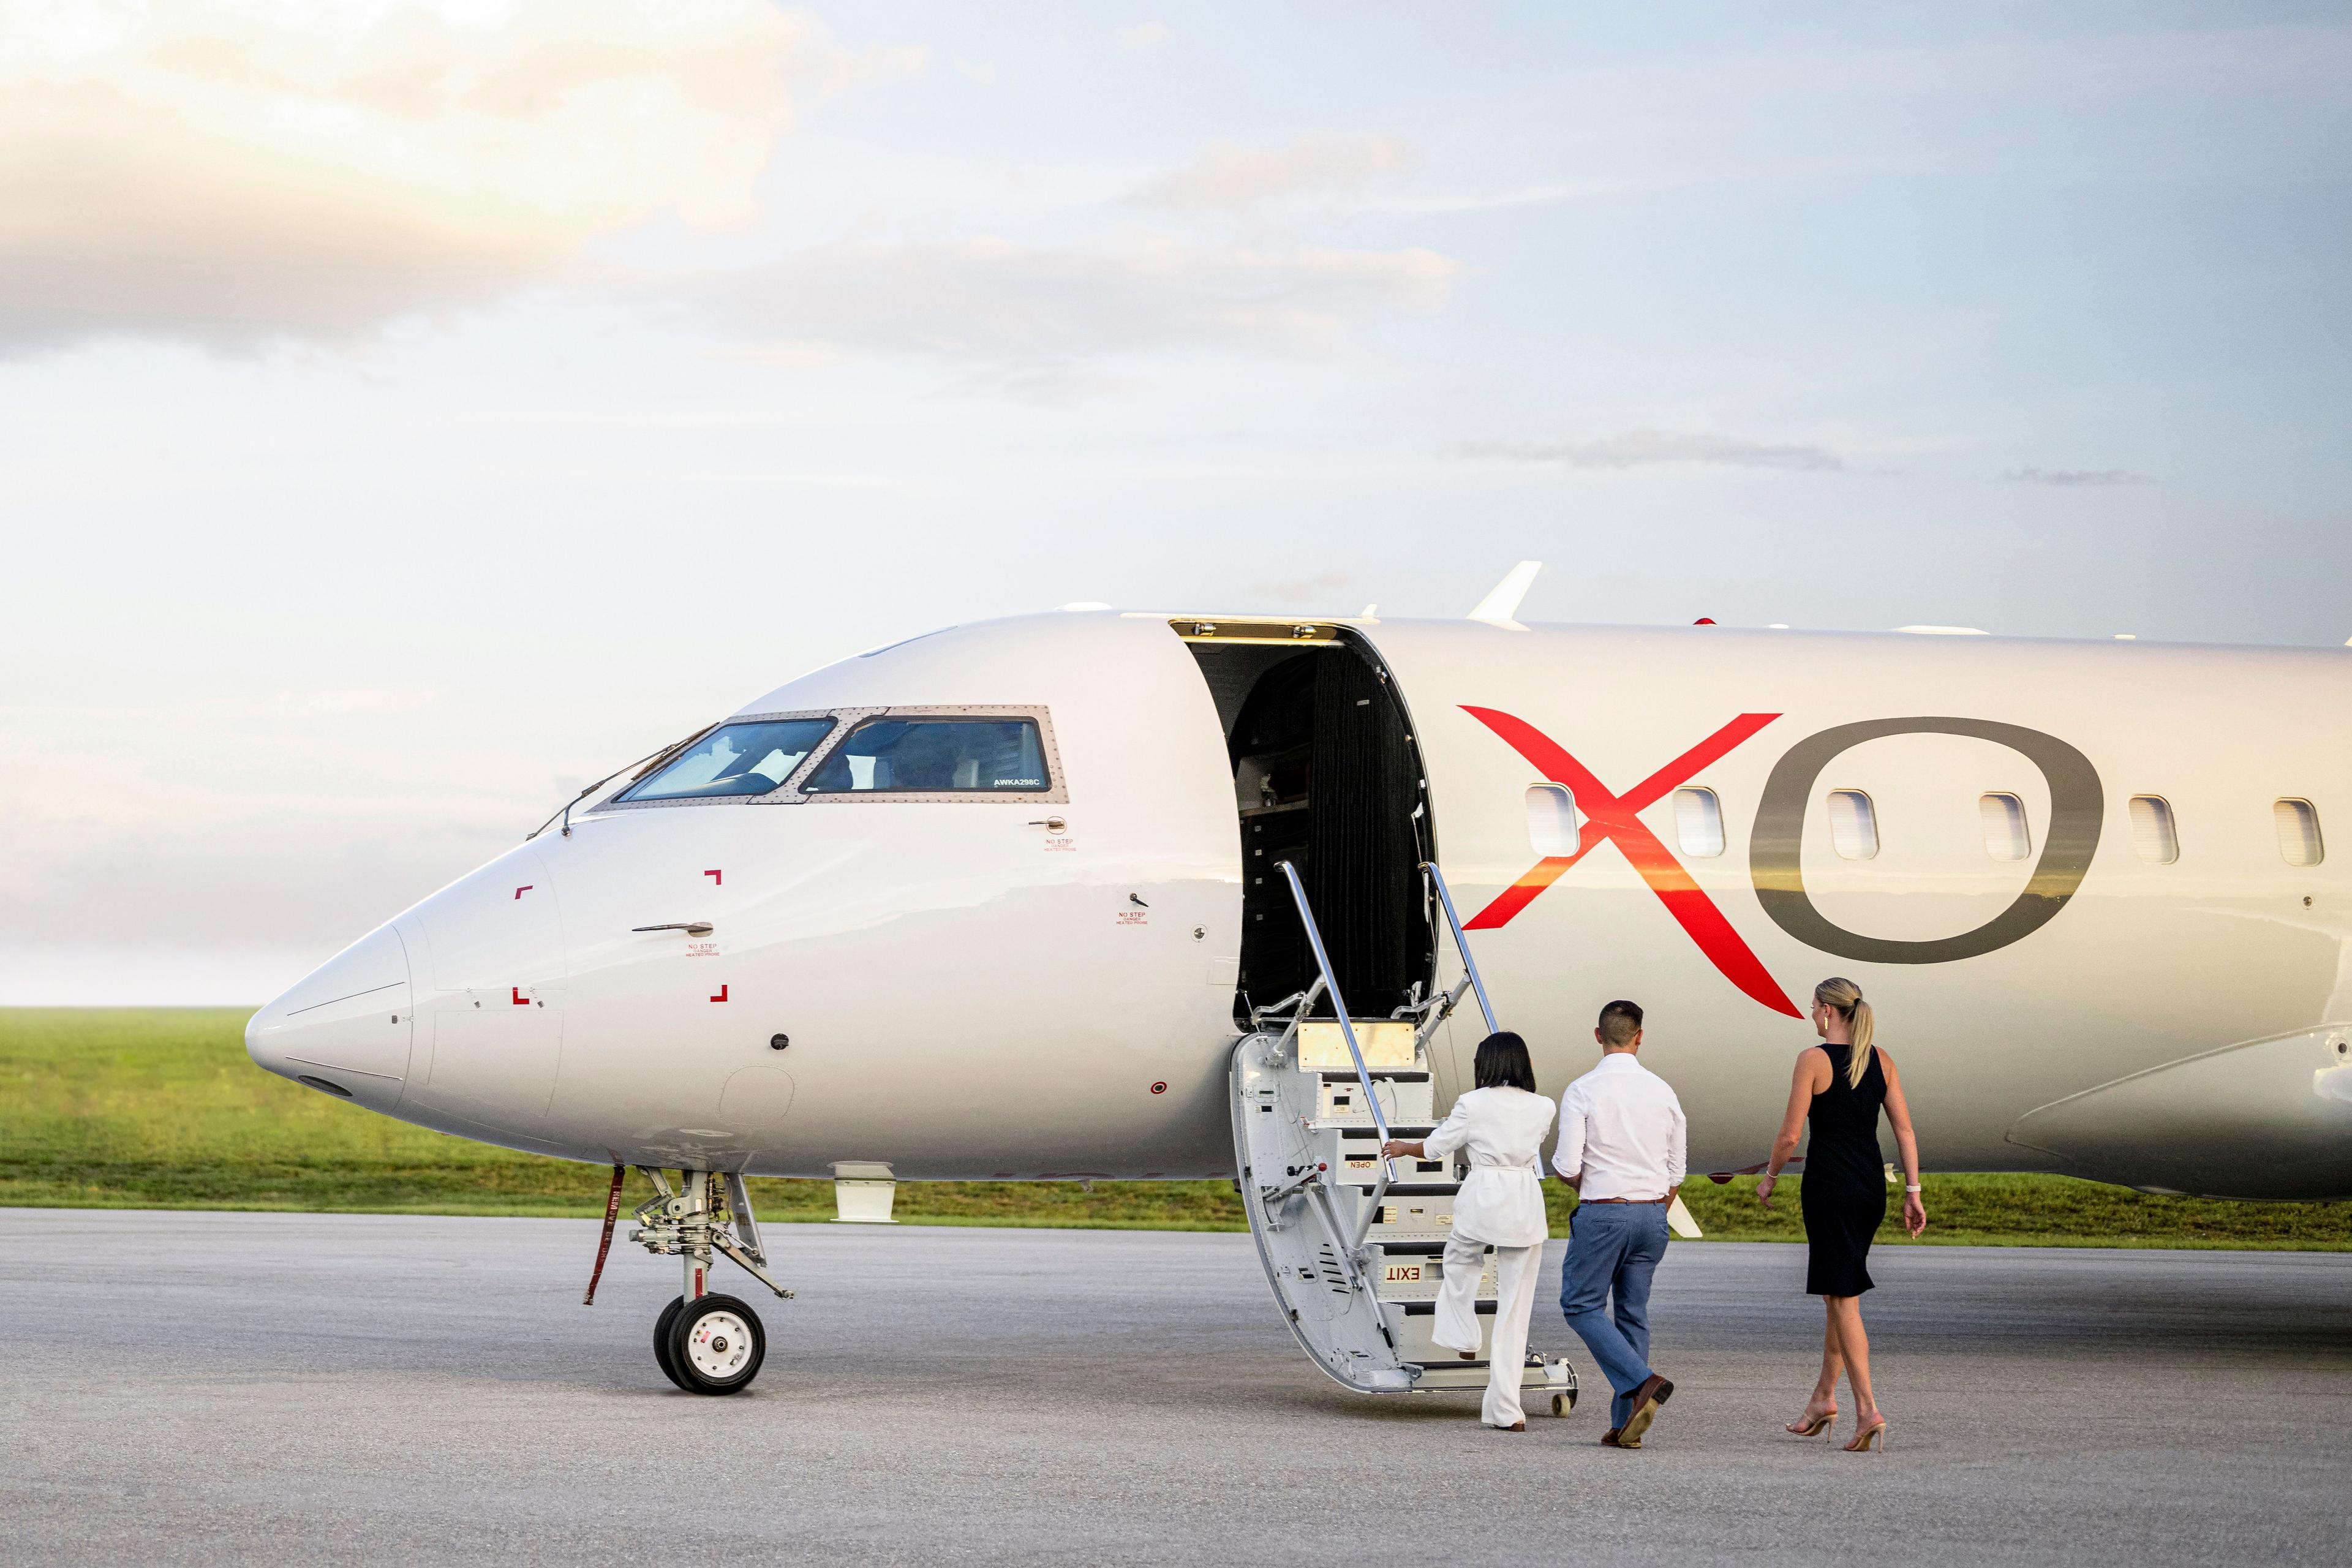 Comparing Cost-Effectiveness: When is Chartering a Private Jet More Economical than Commercial Flights?